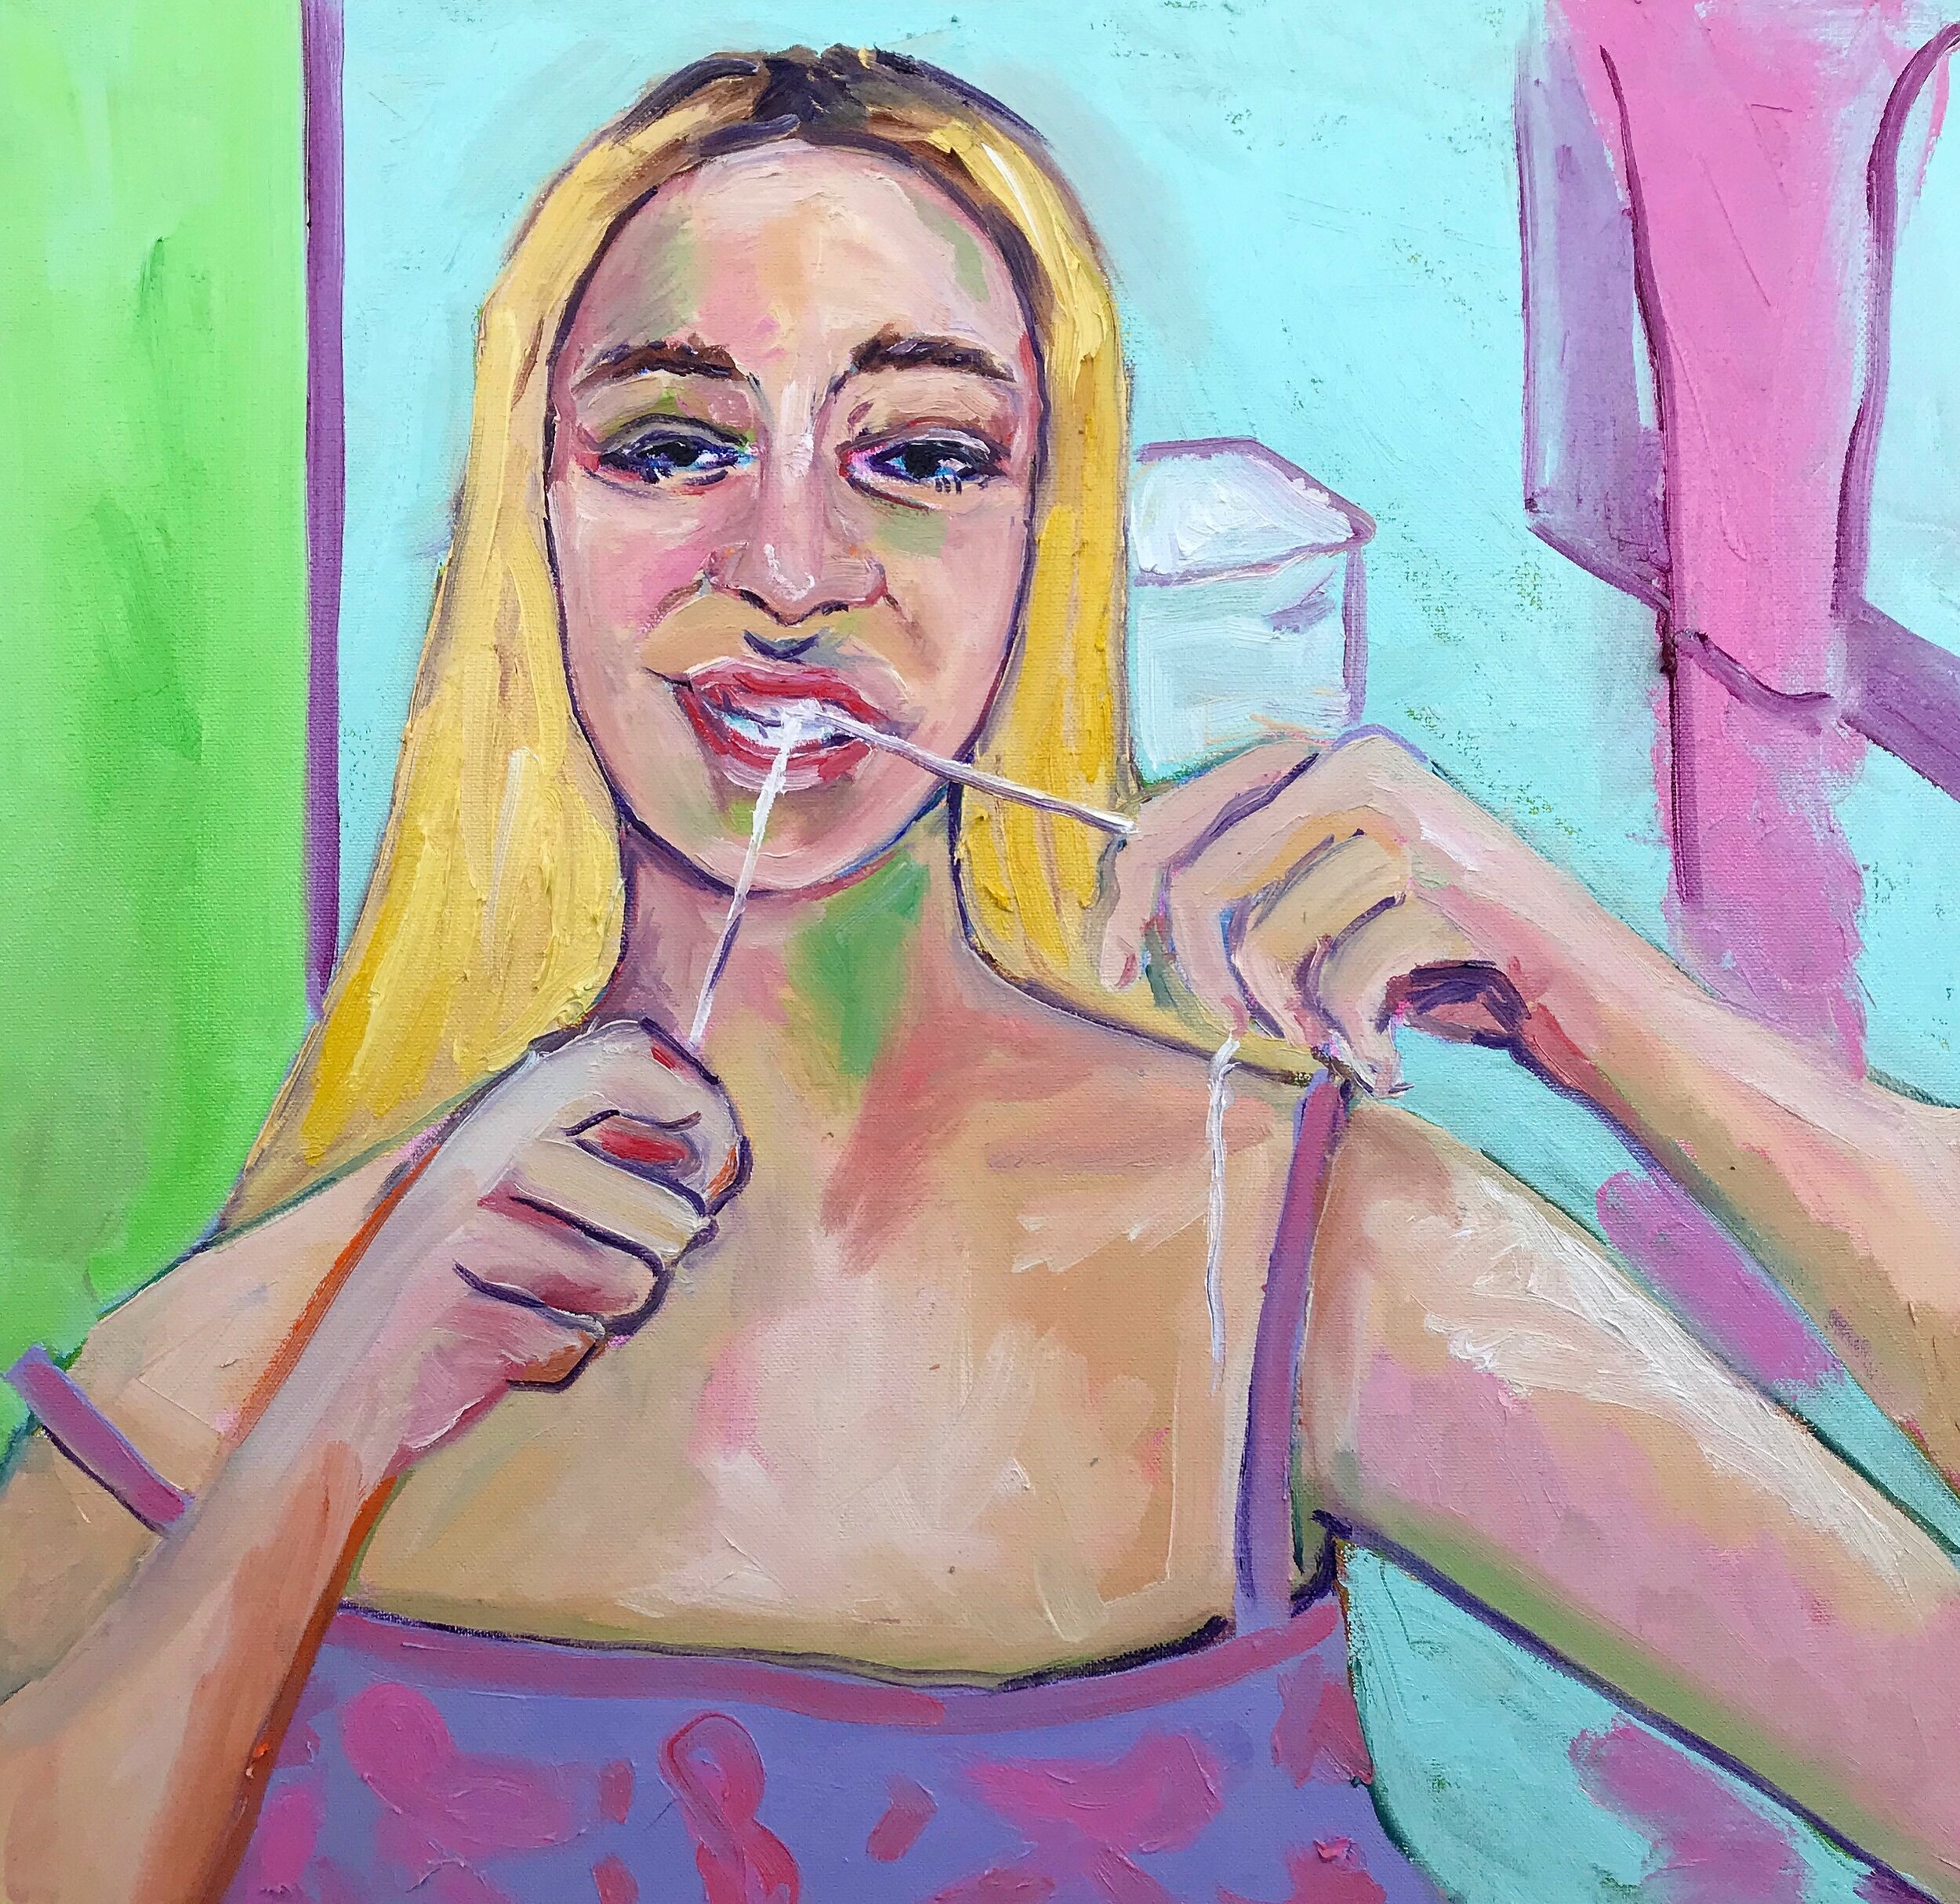  Dental Hygiene   Oil on Canvas  2020  20 inches x 20 inches 